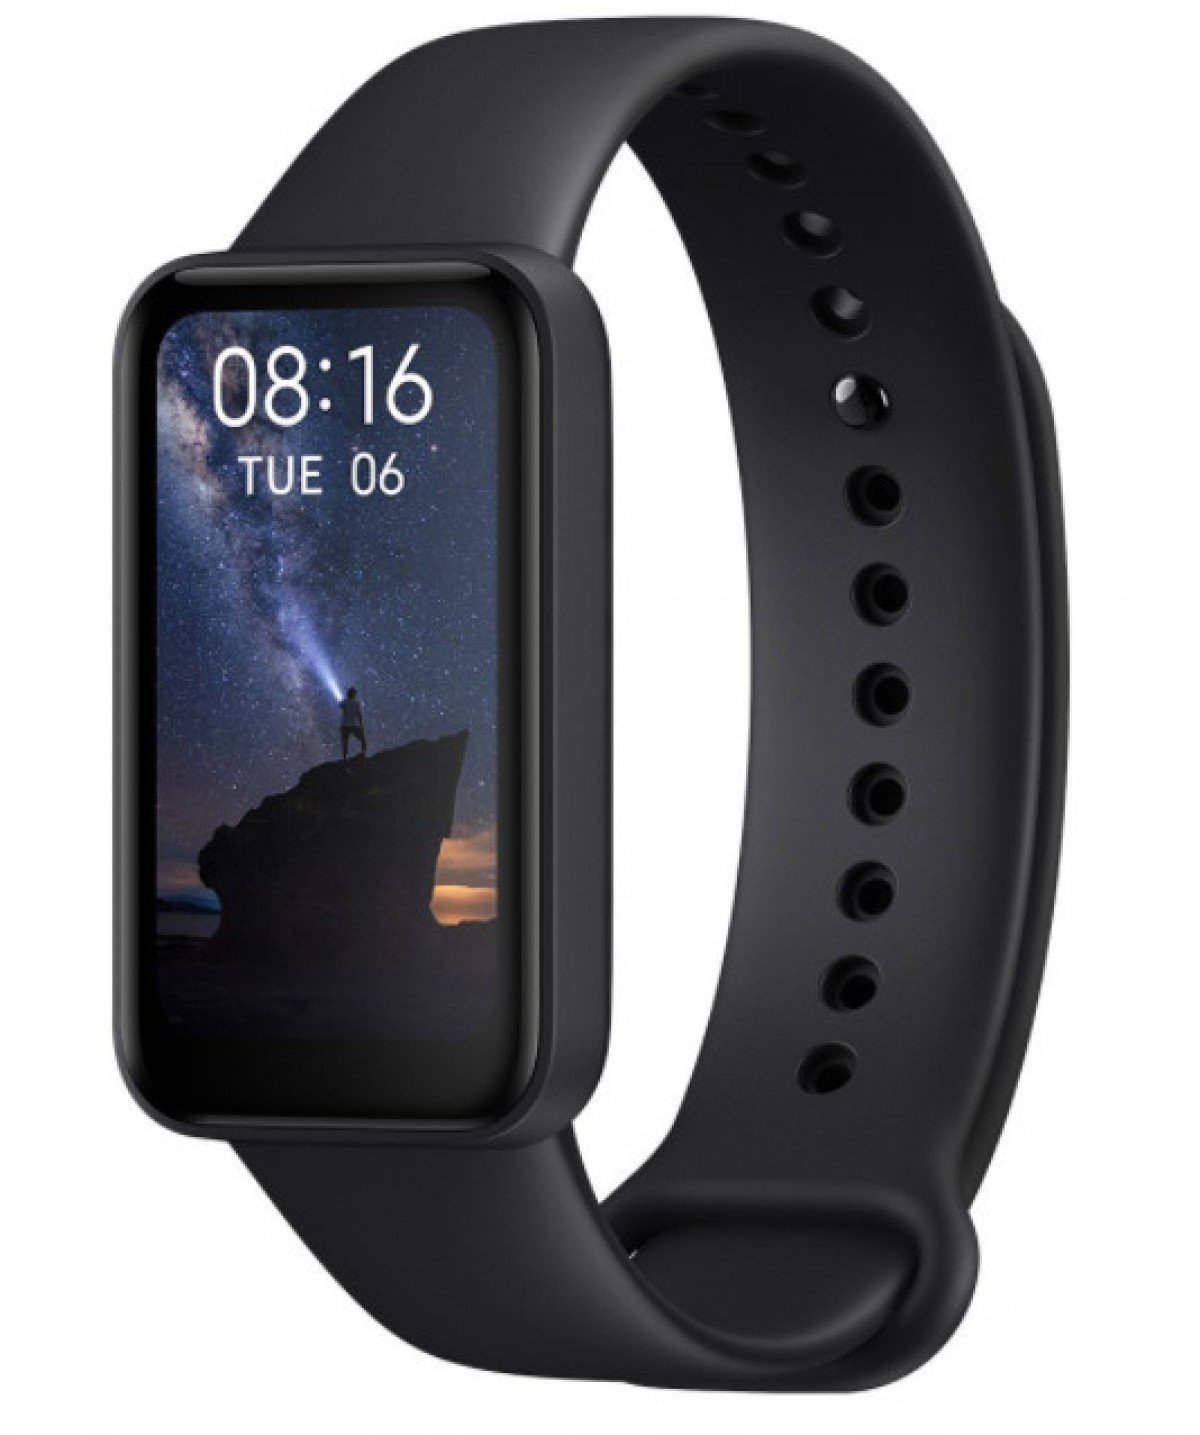 Redmi Smart Band Pro announced with 1.47 '' OLED display